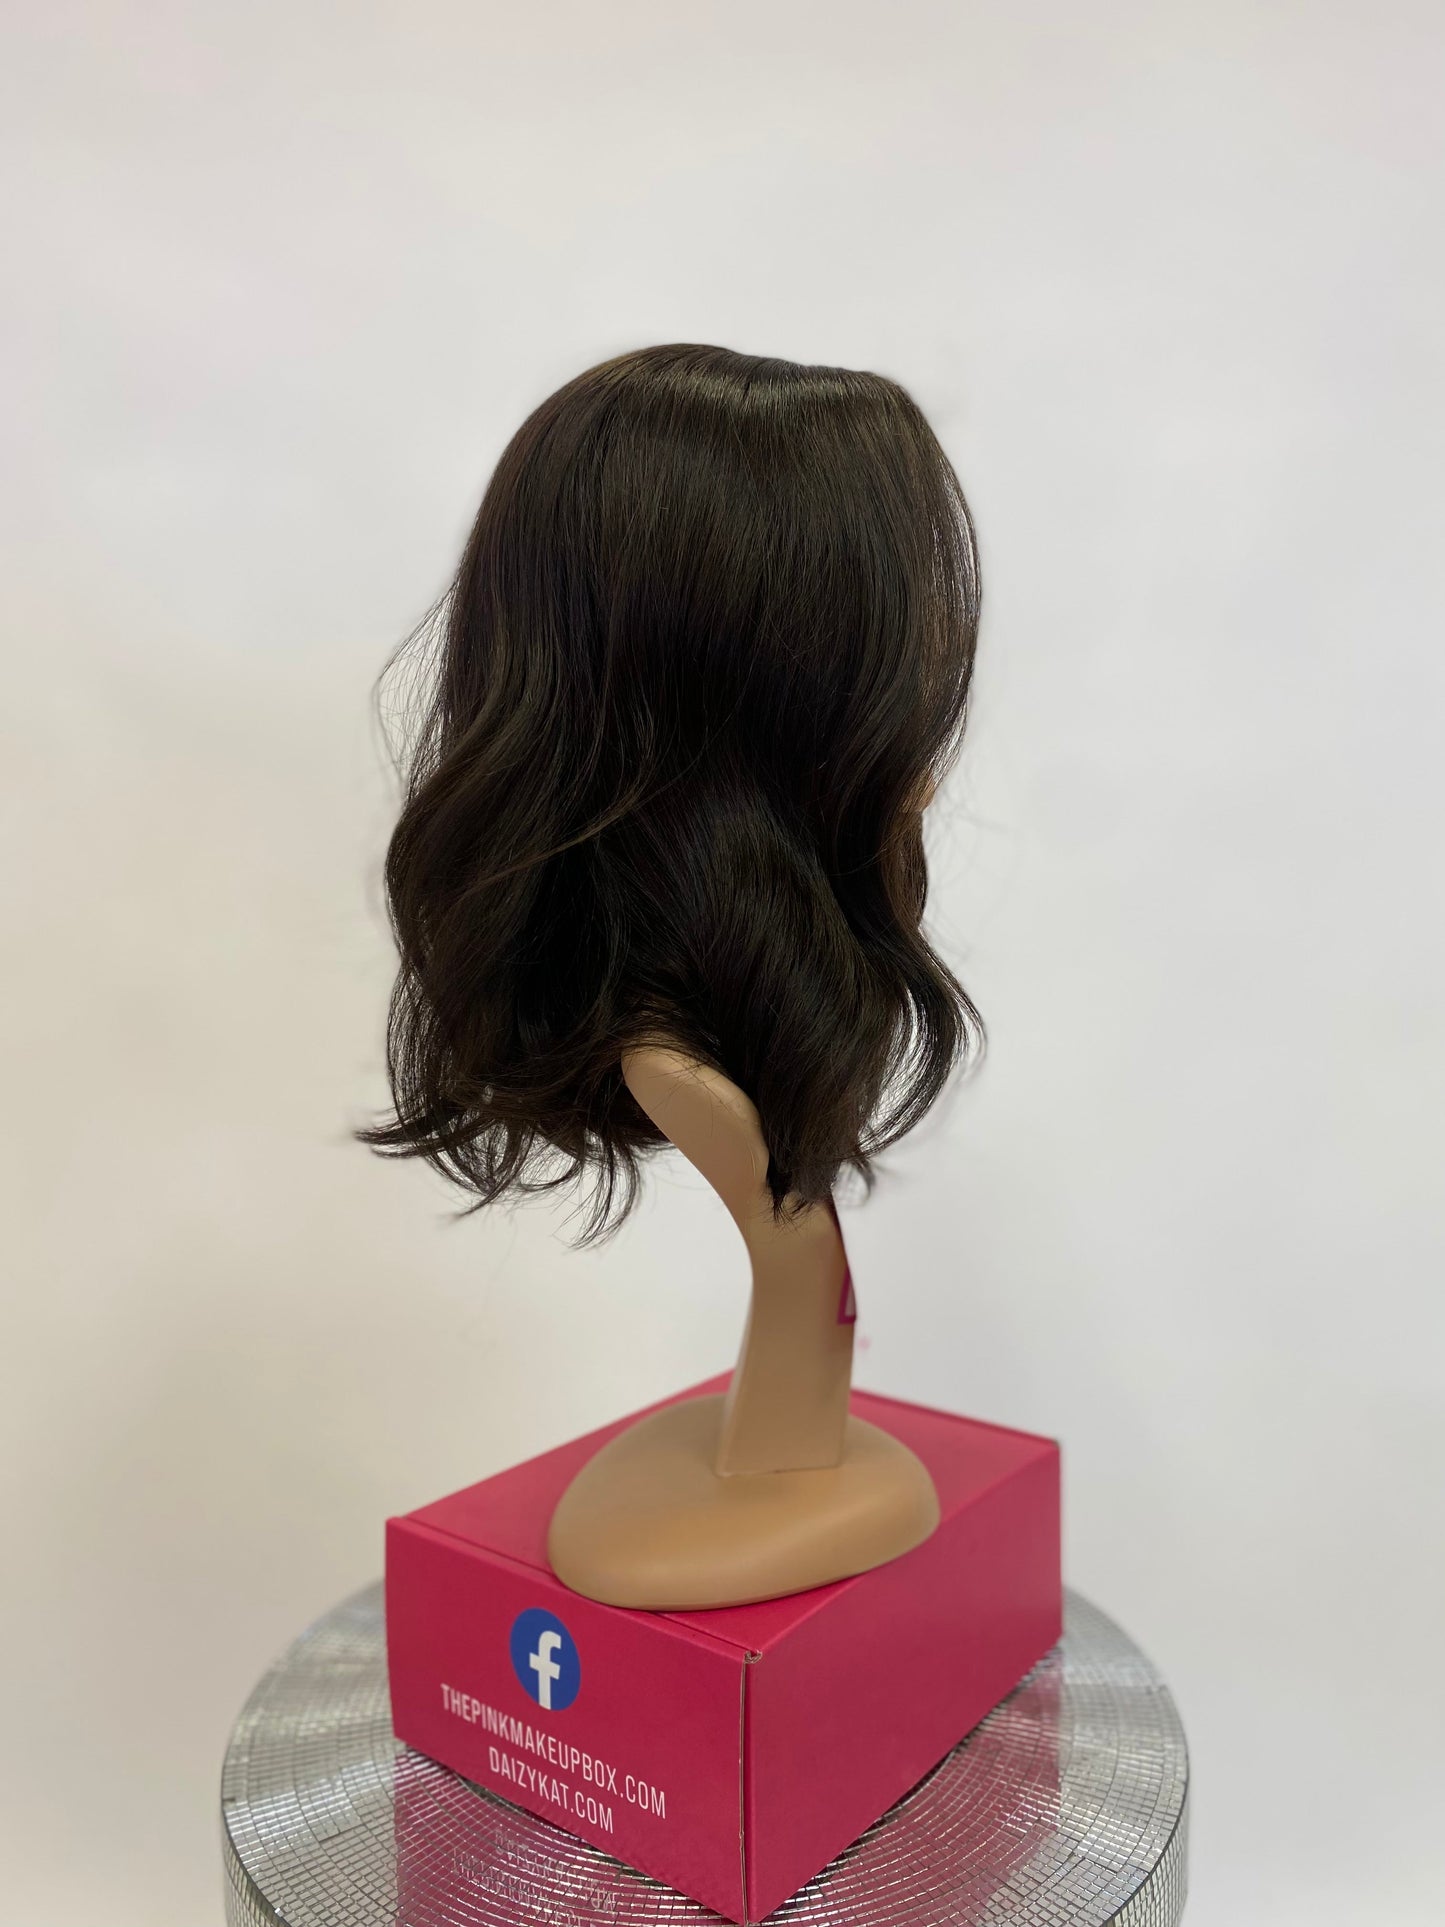 284 Alice - 13x4 Free Part Lace Front Wig - 4 - DaizyKat Cosmetics 284 Alice - 13x4 Free Part Lace Front Wig - 4 DaizyKat Cosmetics WIGS